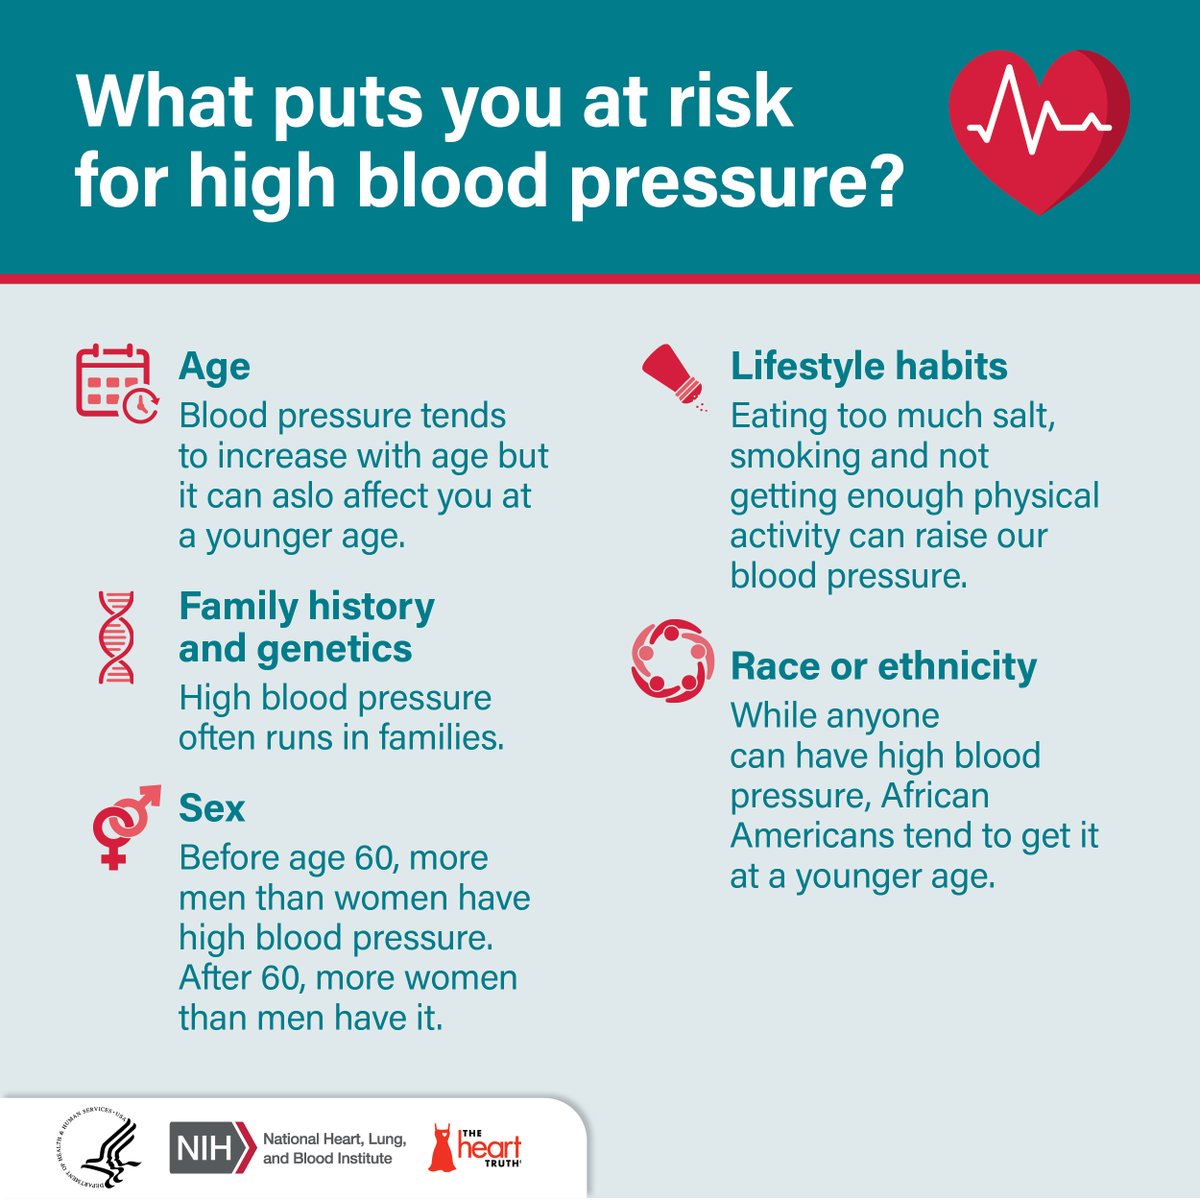 May is #HighBloodPressureMonth! Taking steps like eating healthy, getting regular physical activity, managing stress, getting enough sleep, not smoking and aiming for a healthy weight can help keep blood pressure and #OurHearts healthy. ❤ More resources: nhlbi.nih.gov/hypertension